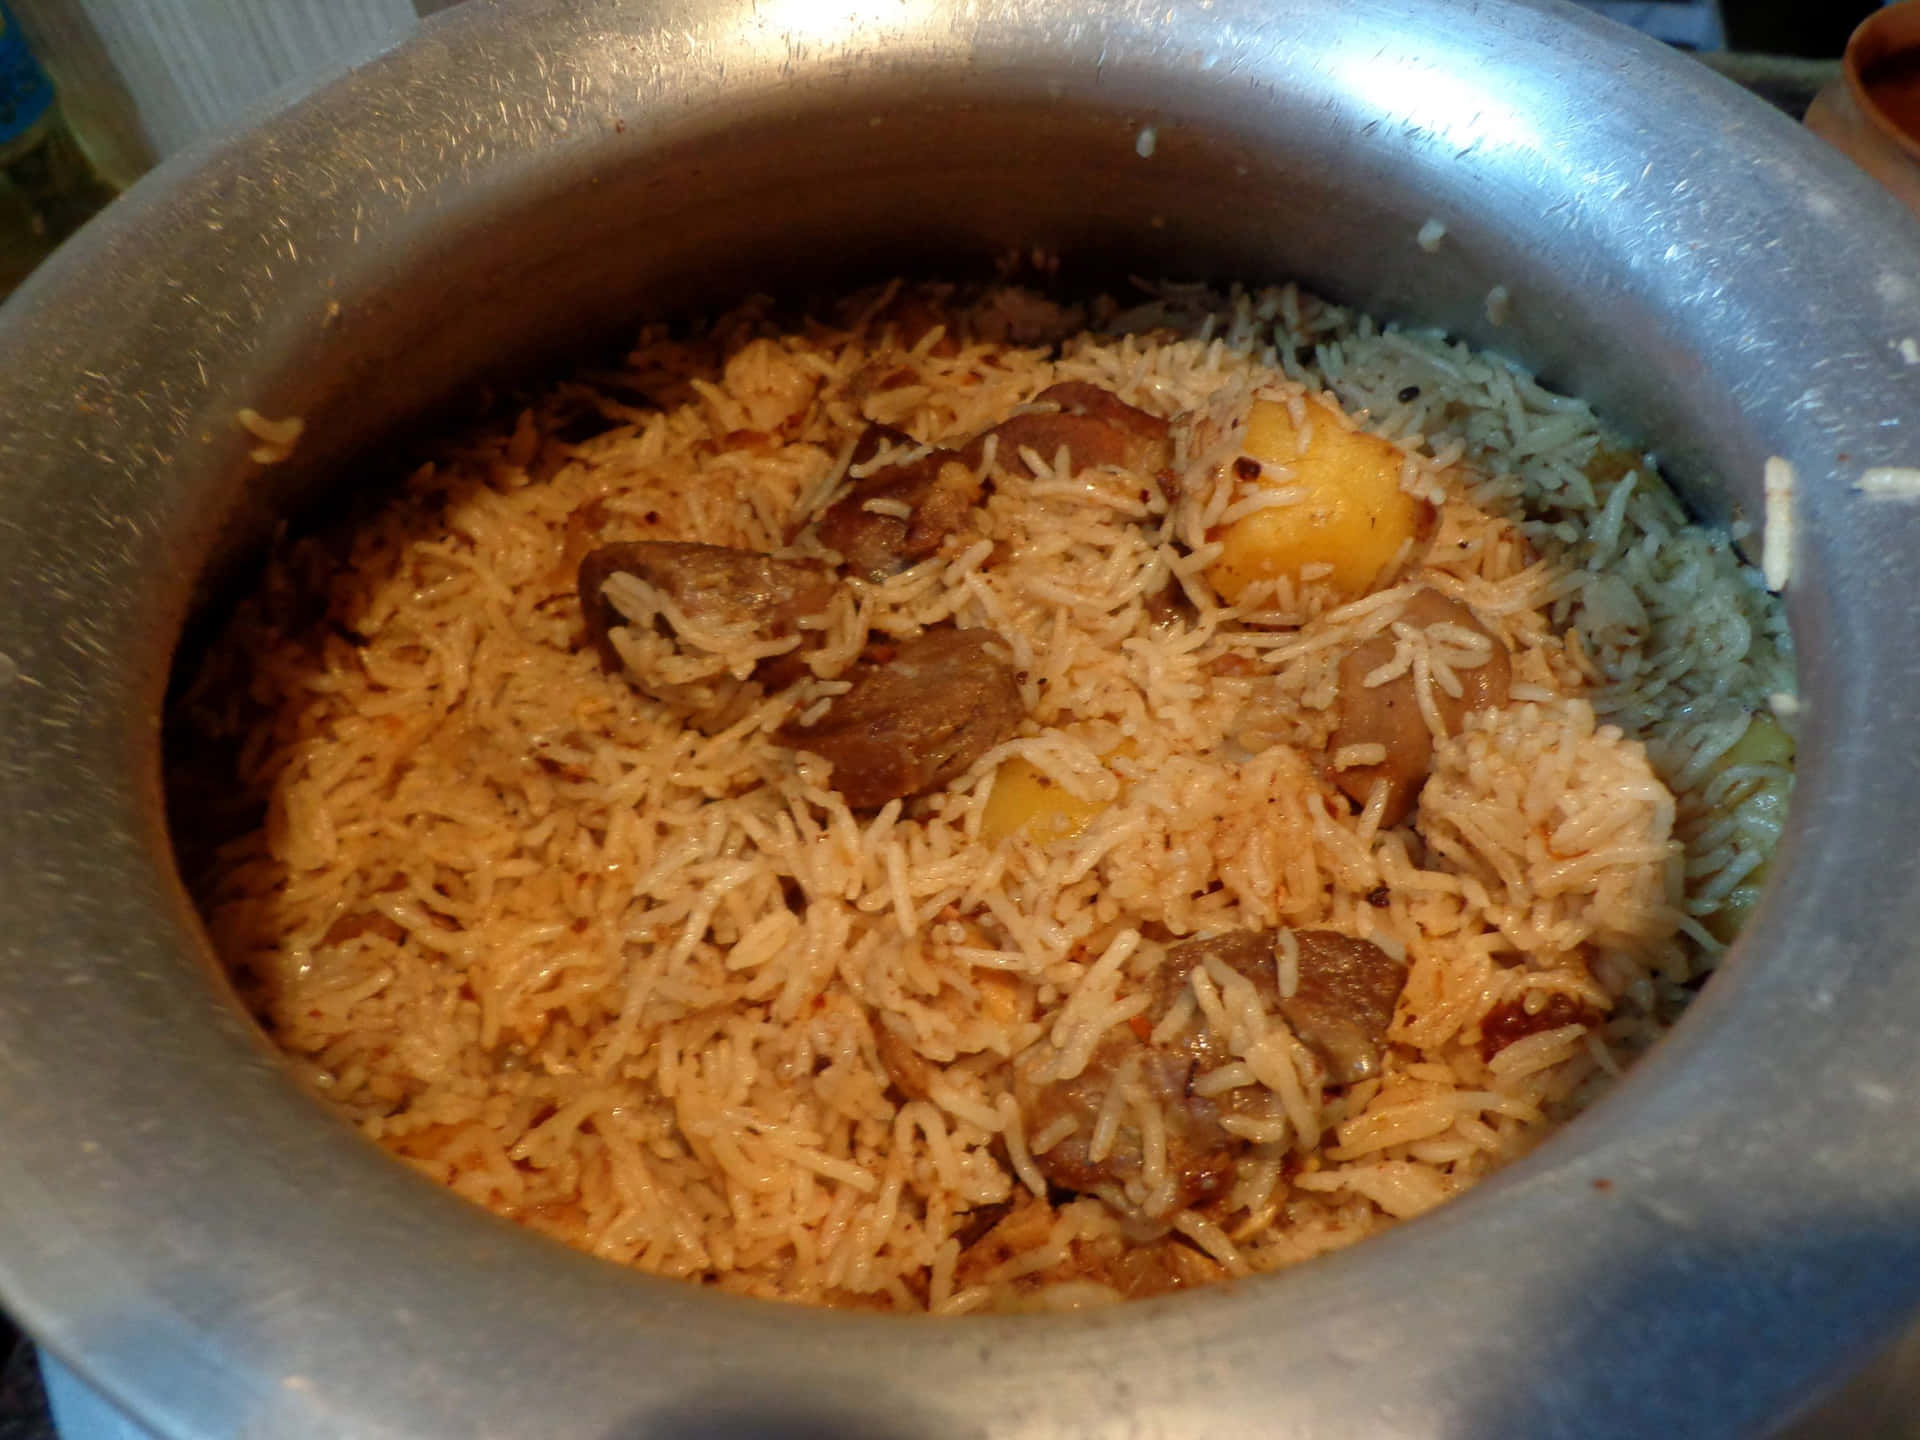 A delicious plate of biryani